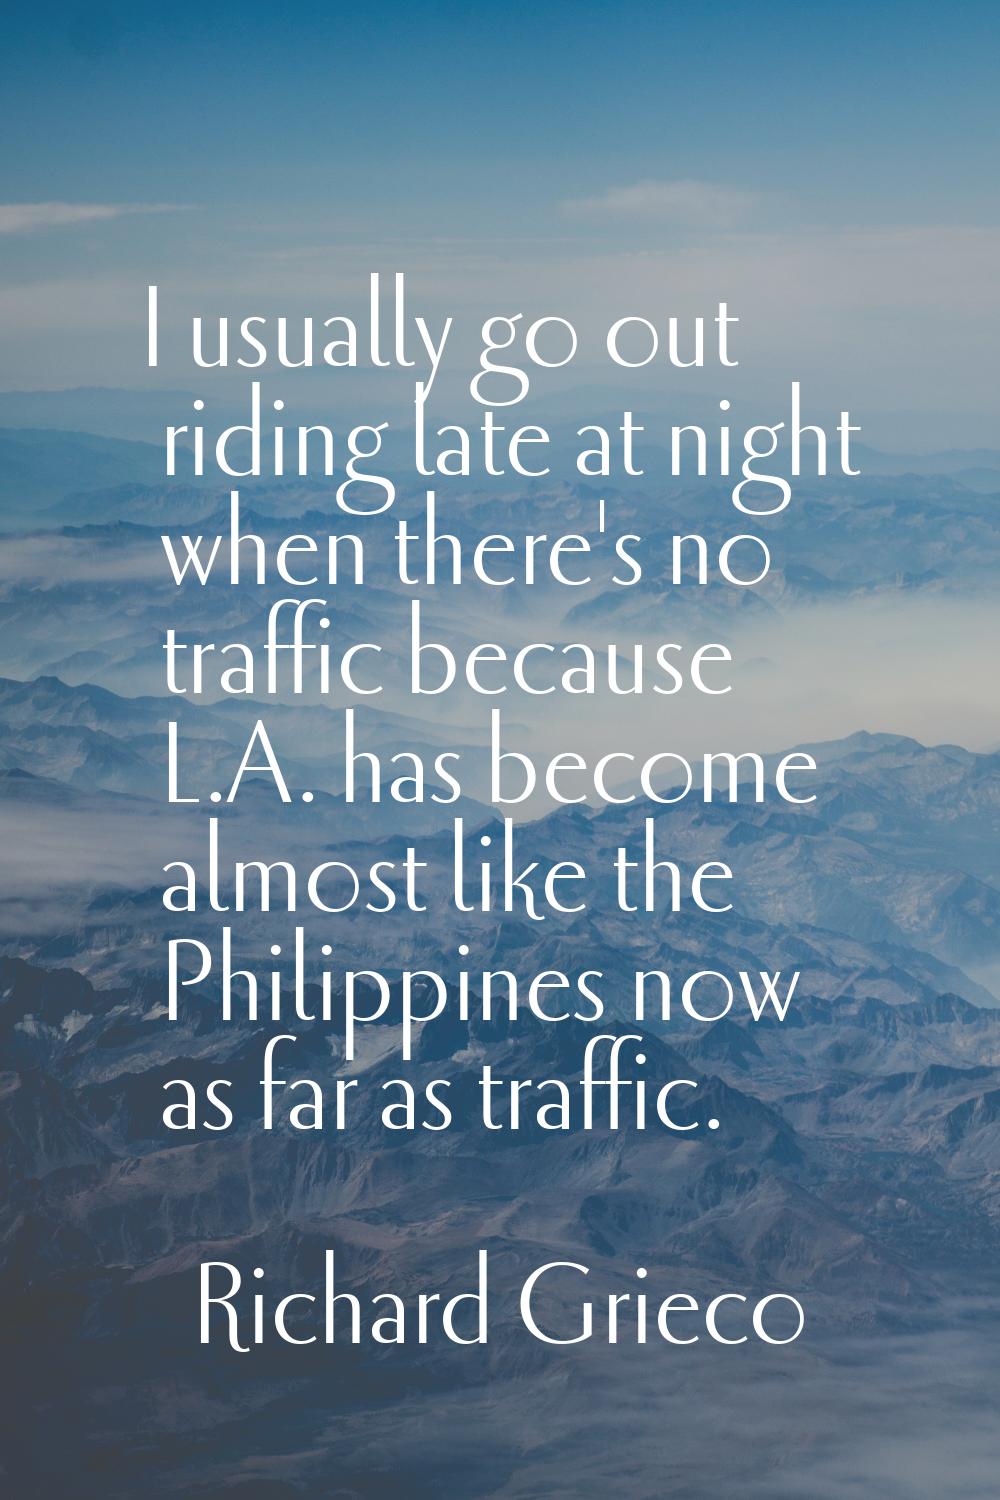 I usually go out riding late at night when there's no traffic because L.A. has become almost like t